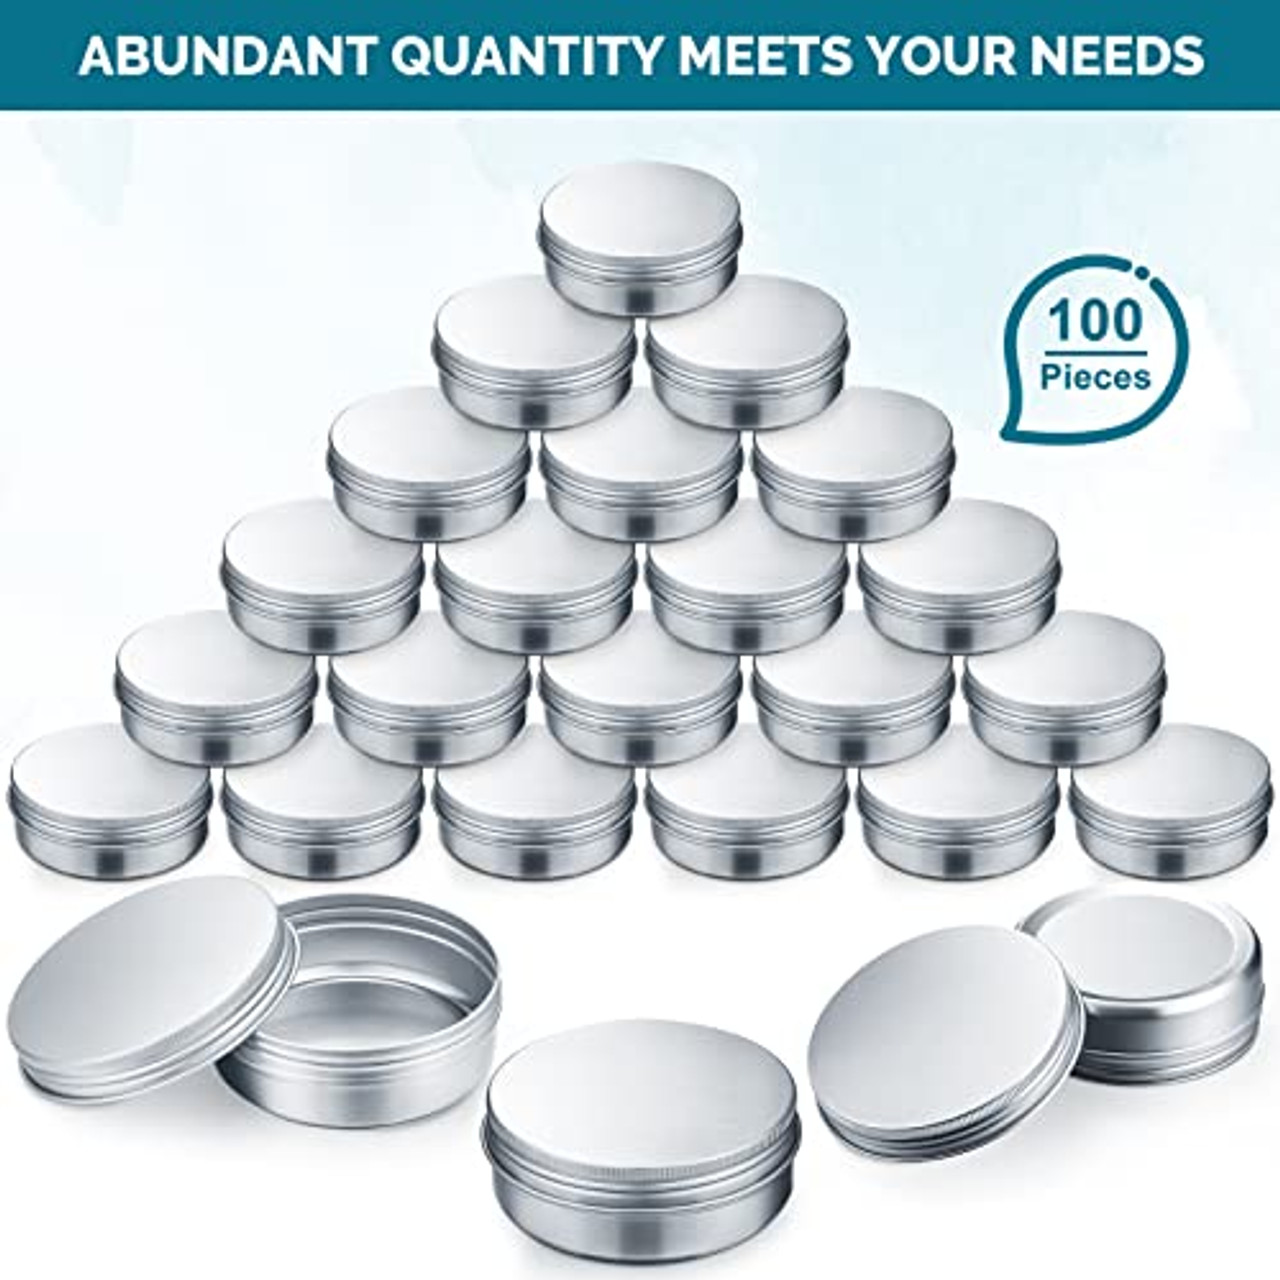 Acrux7 50 Pack 1oz Aluminum Tins with Lids, 30 ml Refillable Tin Containers  Screw Top, Round Lip Balm Tins, Small Metal Storage Travel Tin Cans for